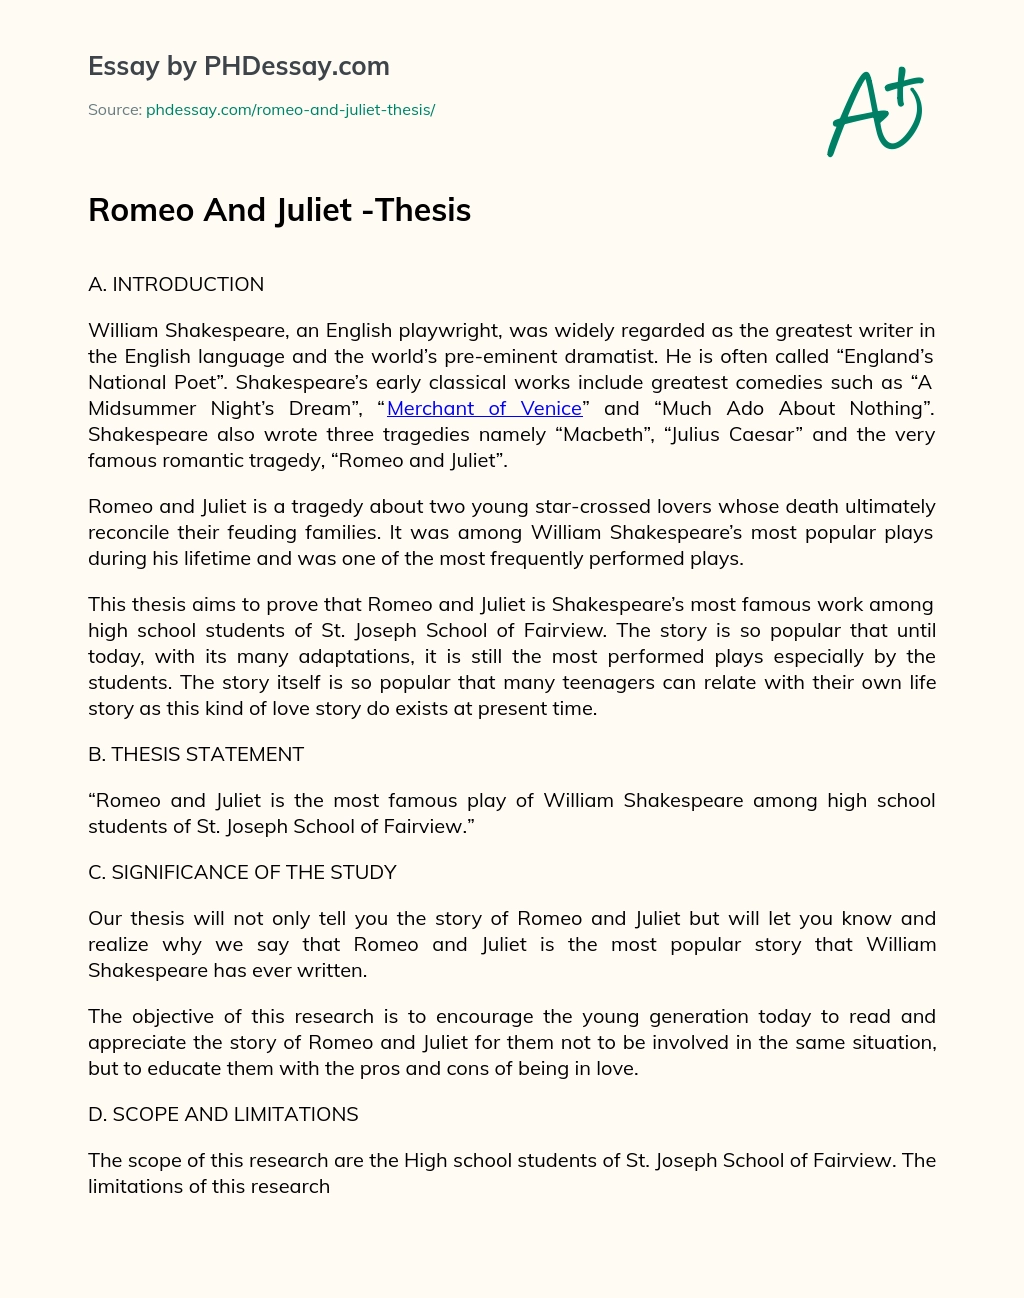 Romeo And Juliet -Thesis essay